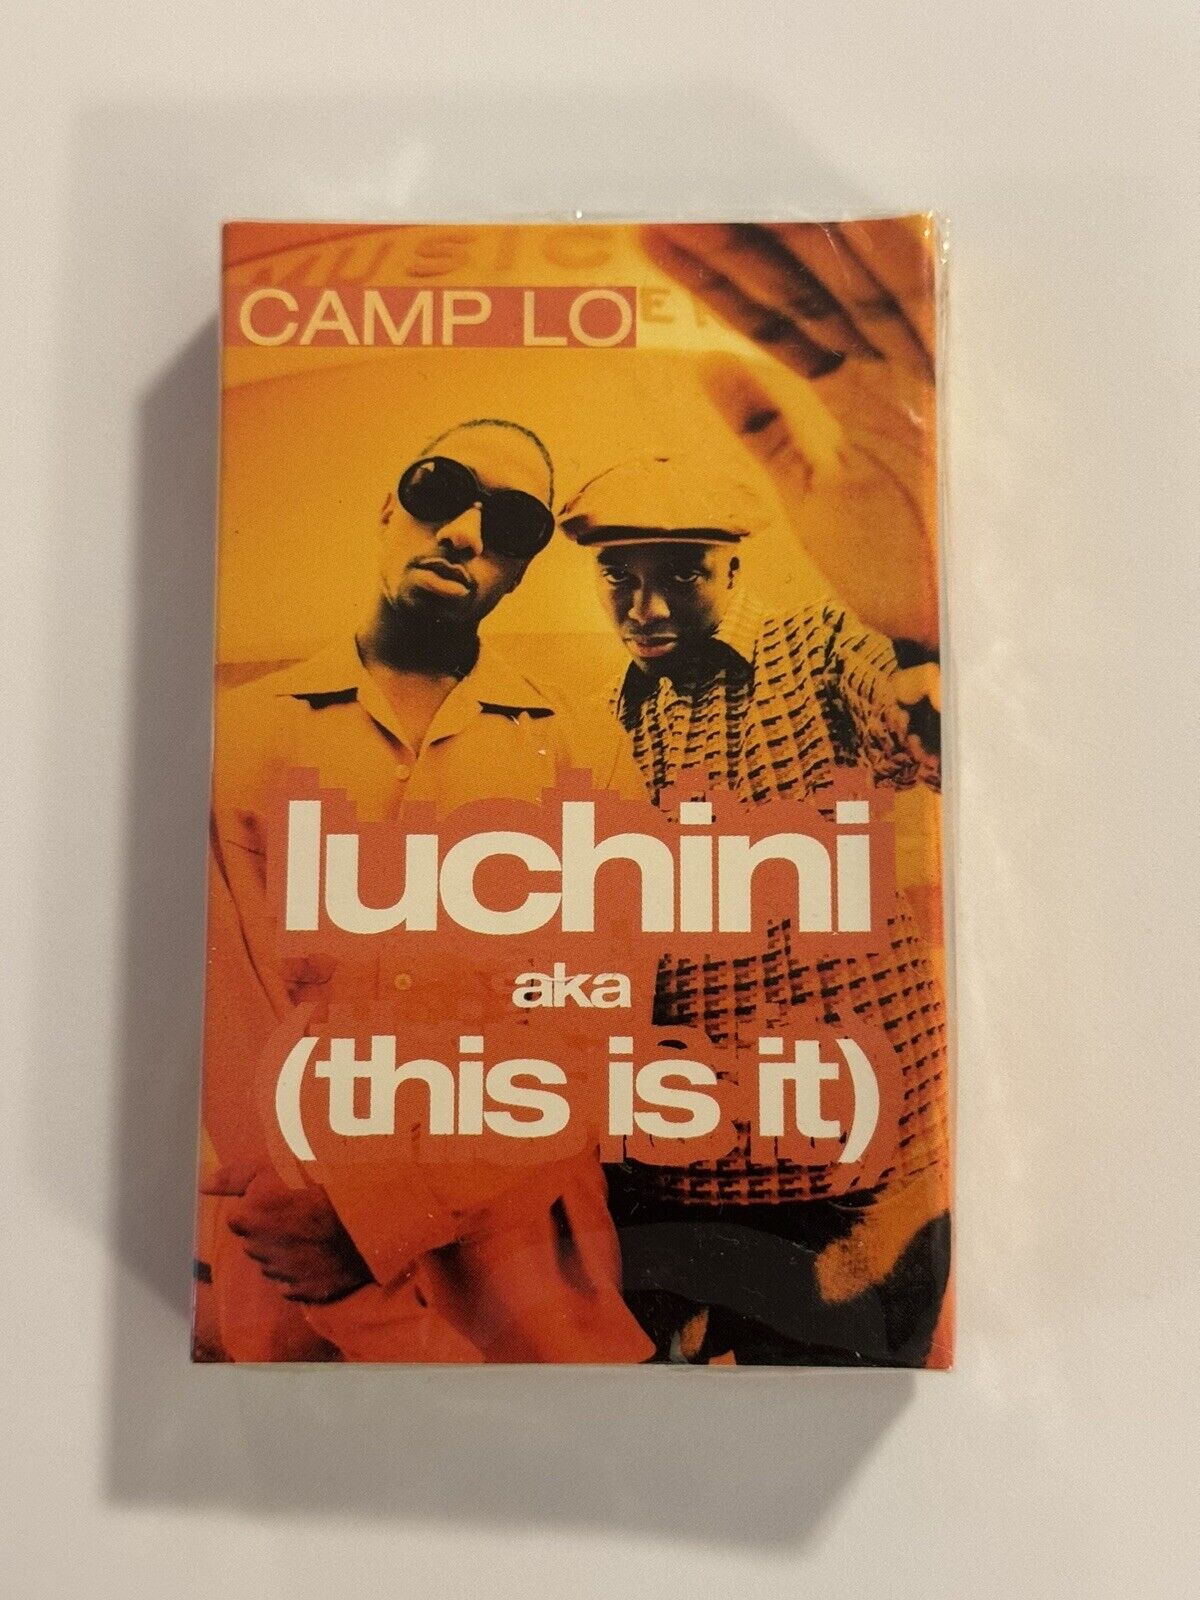 CAMP LO Luchini AKA (This is It) 1996 CASSINGLE New SEALED Pete Rock CL Smooth